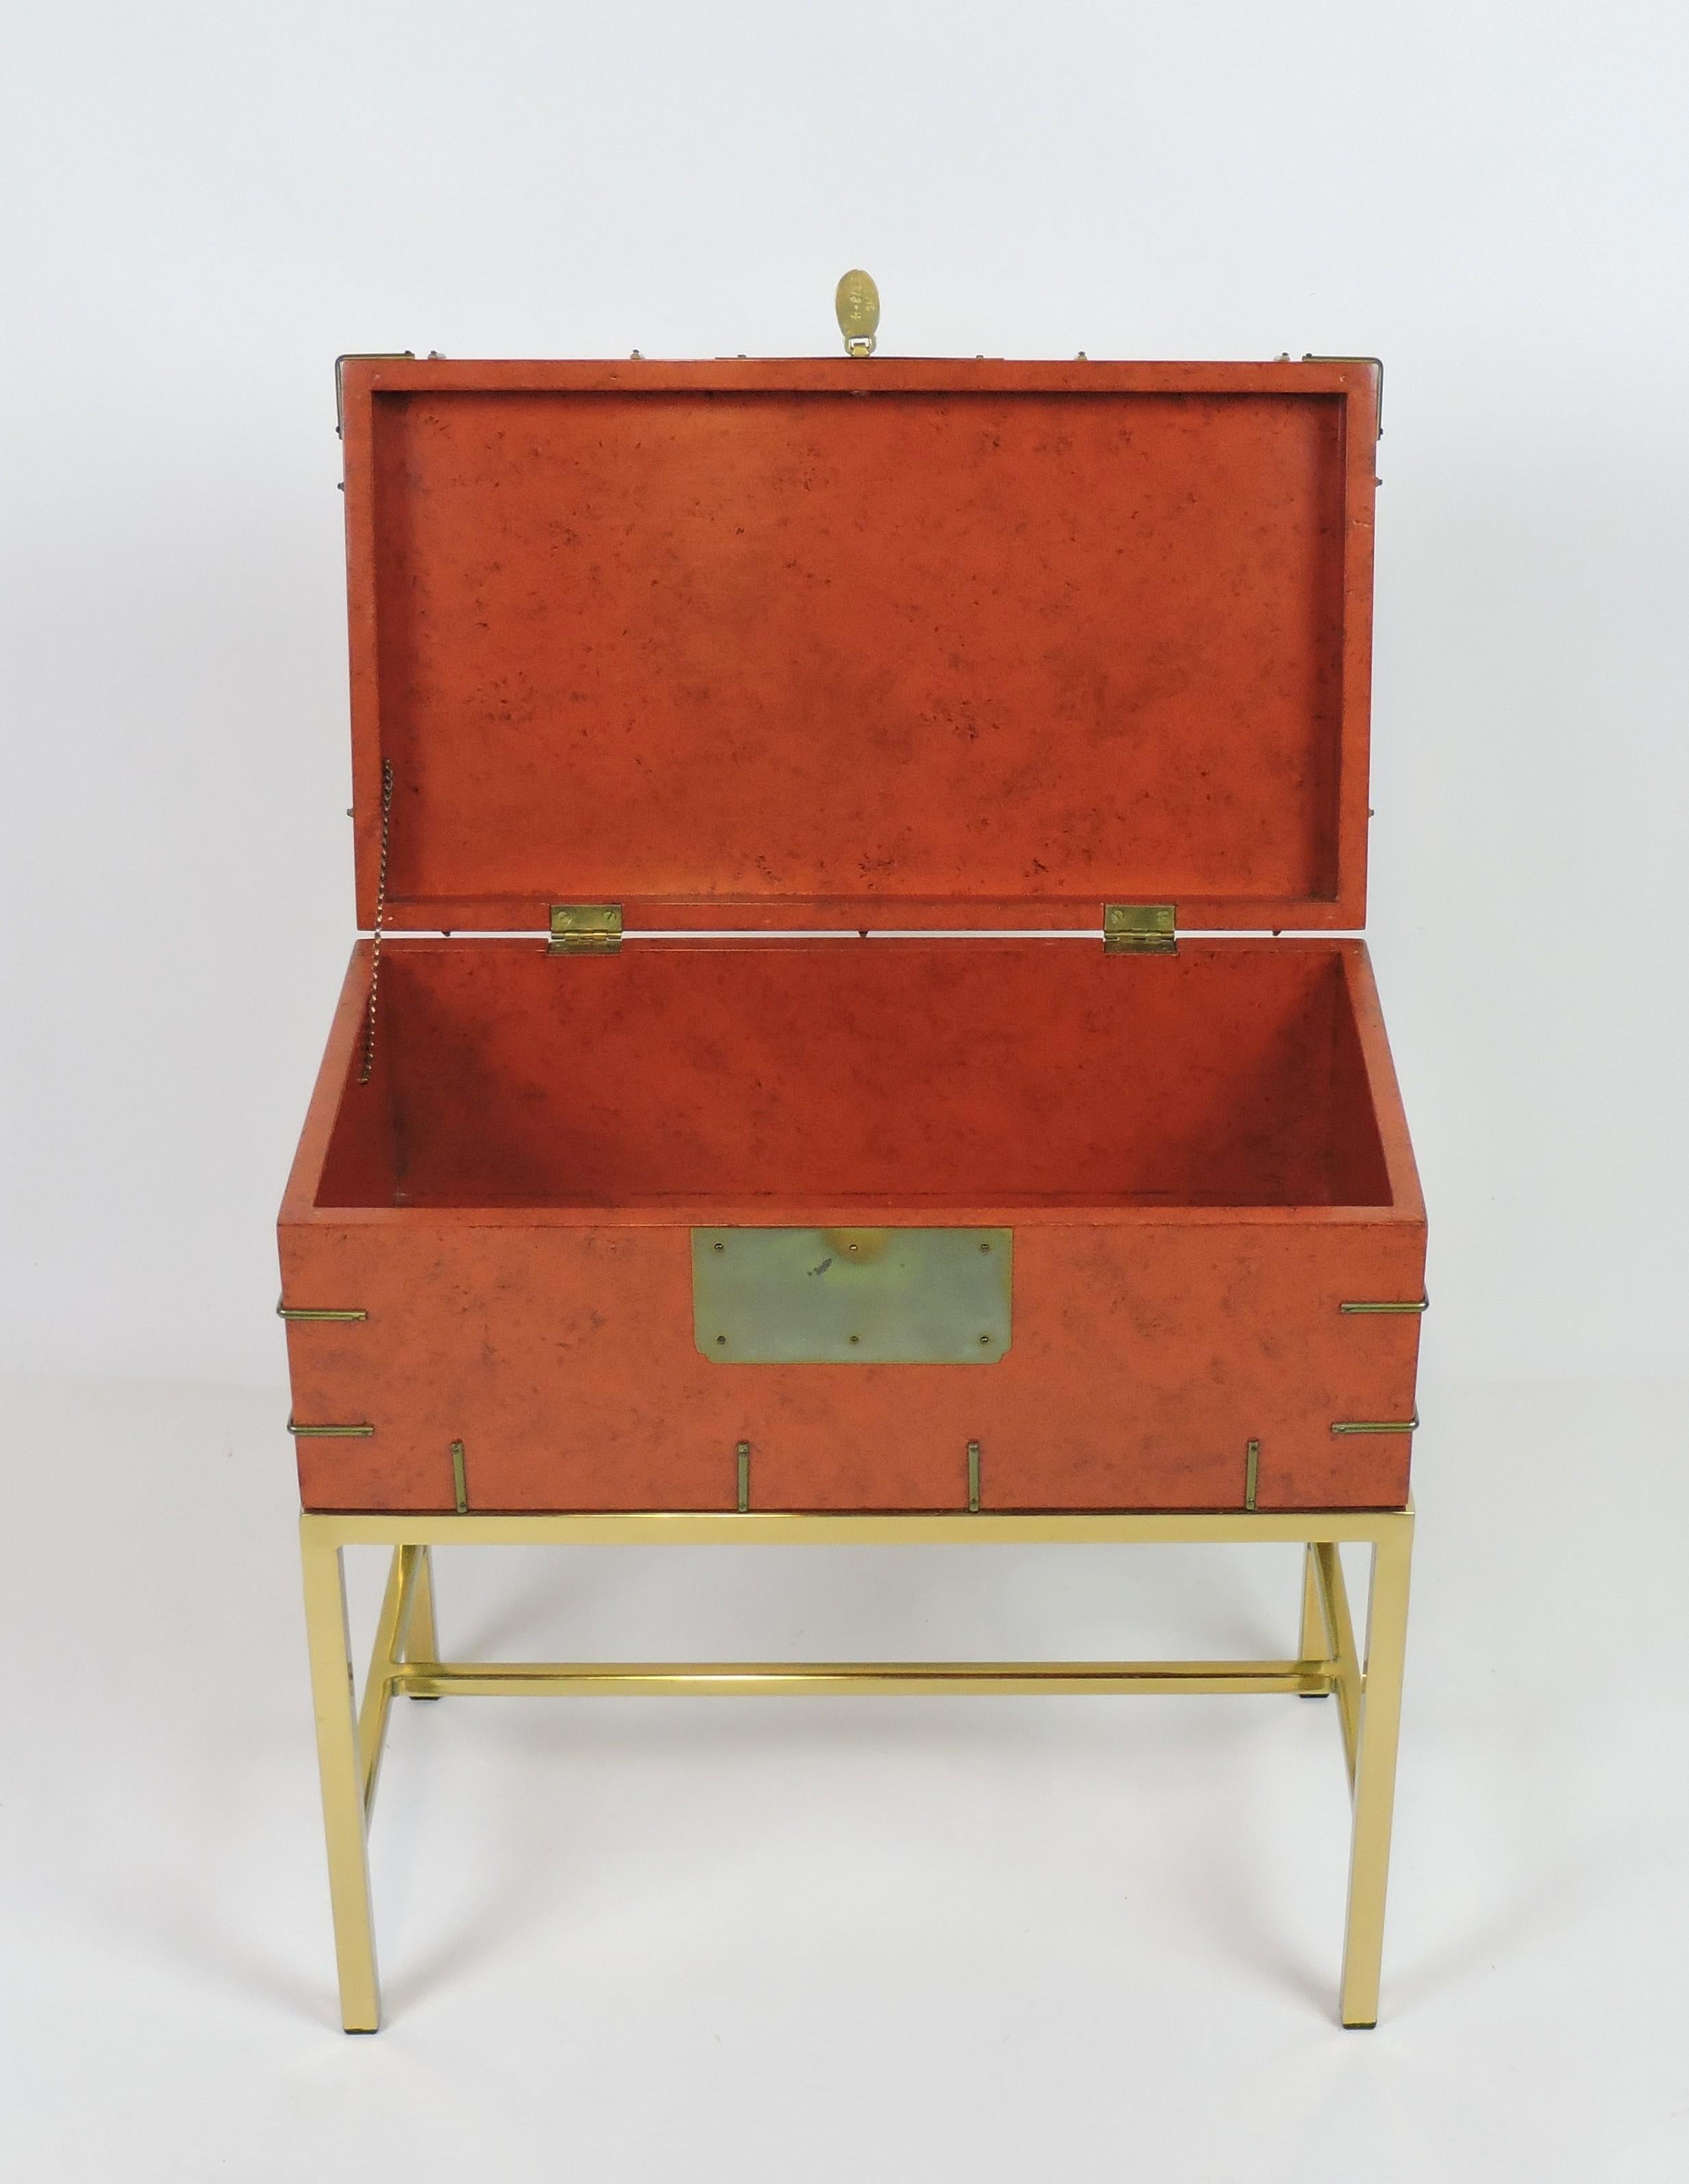 Lovely vintage campaign style chest that could also be used as a small side table. This piece has a red-orange painted lacquer finish along with brass accents and it sits on a brass stand. Nice look and very good quality. 